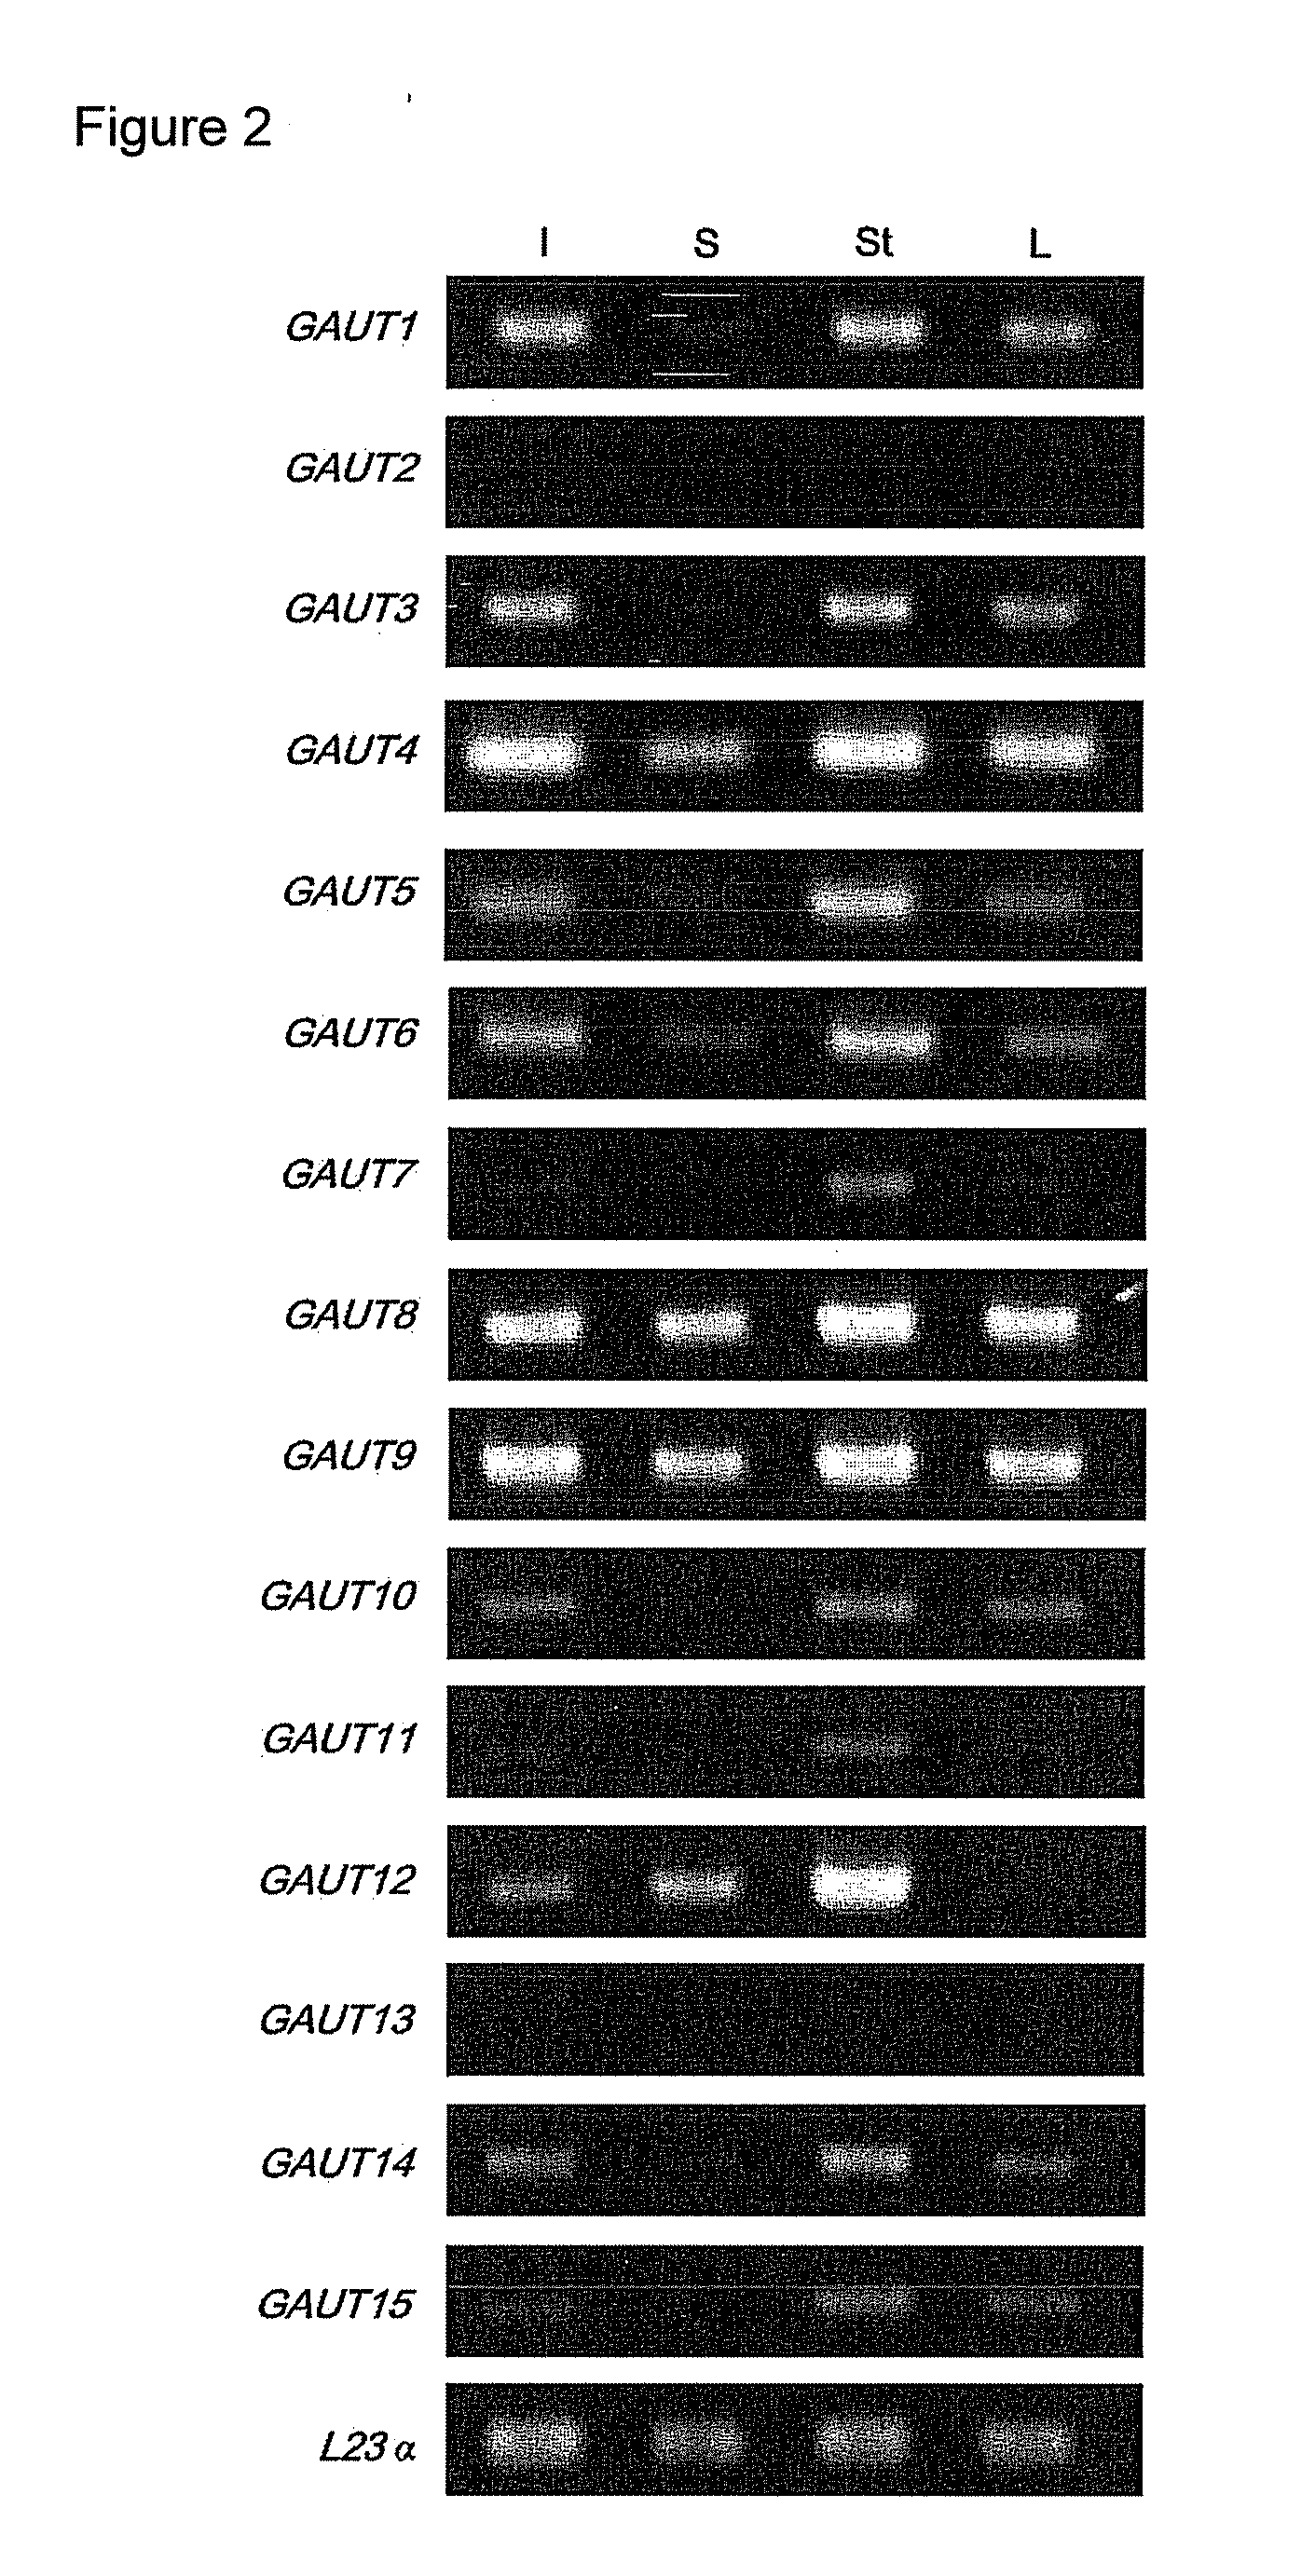 Plants with altered cell wall biosynthesis and methods of use